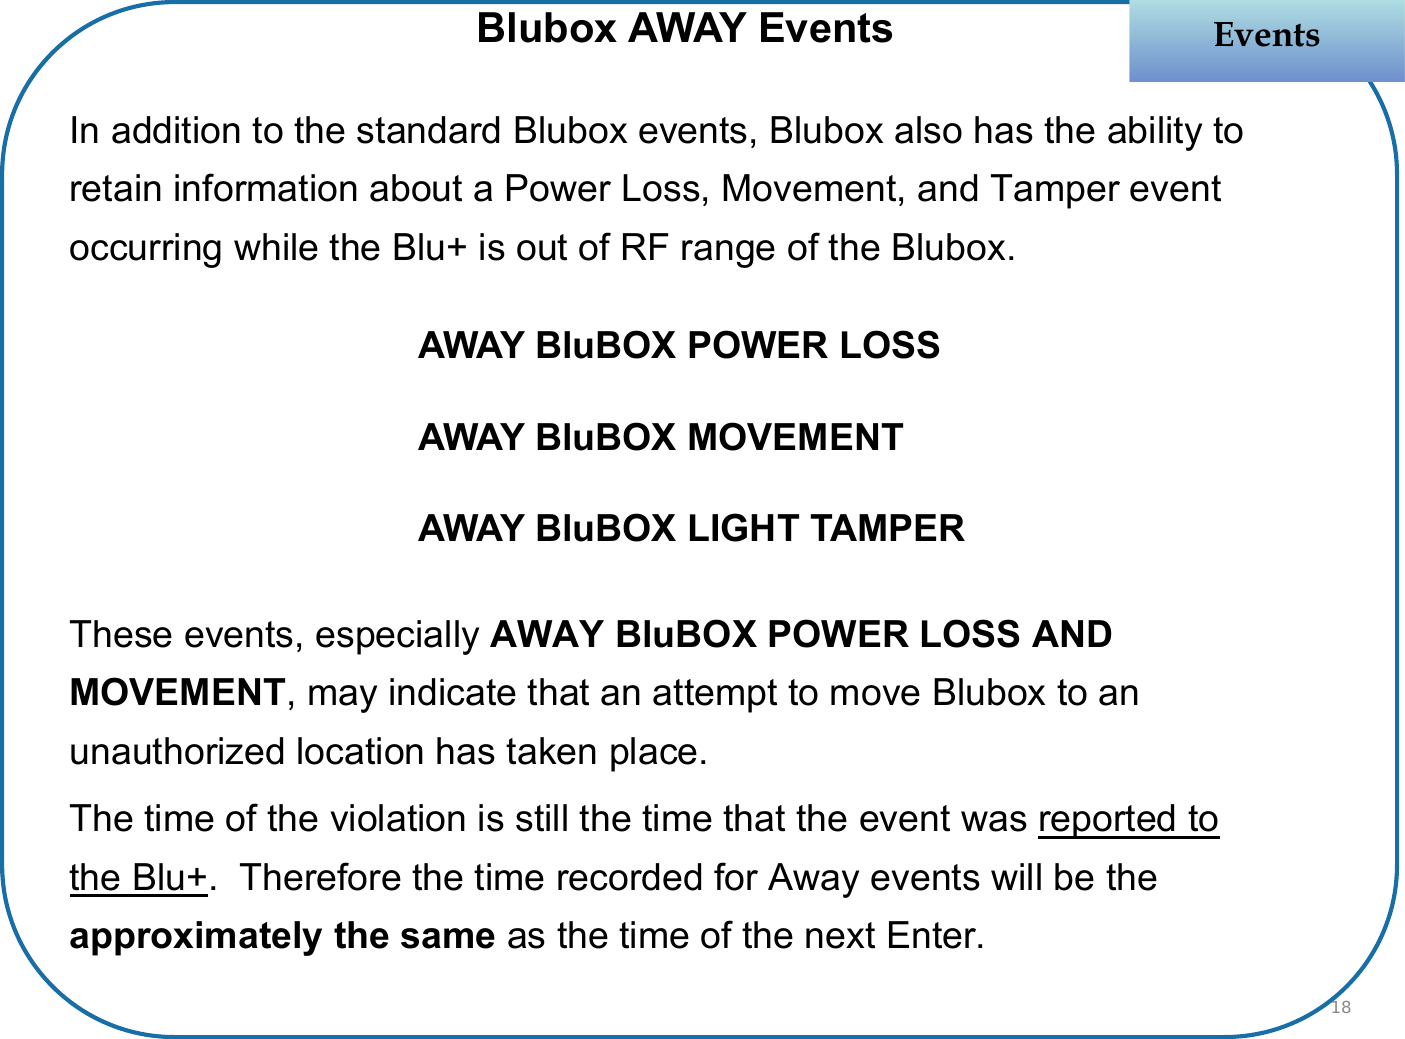 In addition to the standard Blubox events, Blubox also has the ability to retain information about a Power Loss, Movement, and Tamper event occurring while the Blu+ is out of RF range of the Blubox.These events, especially AWAY BluBOX POWER LOSS AND MOVEMENT, may indicate that an attempt to move Blubox to an unauthorized location has taken place. The time of the violation is still the time that the event was reported to the Blu+.  Therefore the time recorded for Away events will be the approximately the same as the time of the next Enter.  EventsEventsBlubox AWAY EventsAWAY BluBOX POWER LOSSAWAY BluBOX MOVEMENTAWAY BluBOX LIGHT TAMPER18